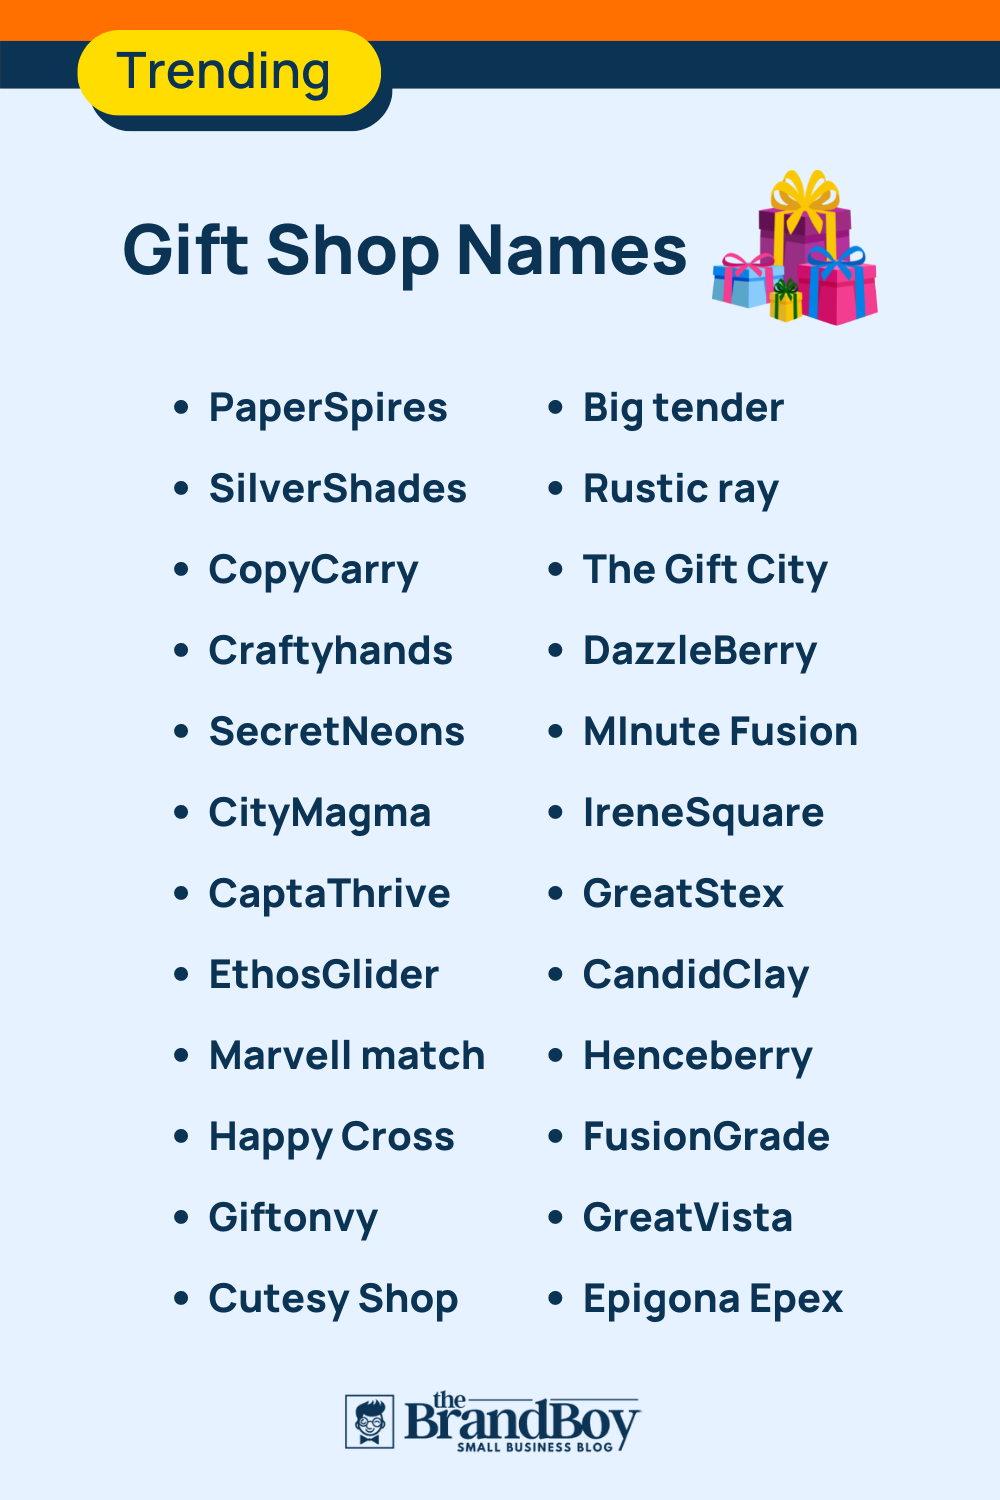 1090+ Gift Shop Name Ideas, Suggestions & Domain Names! (Video+Infographic)